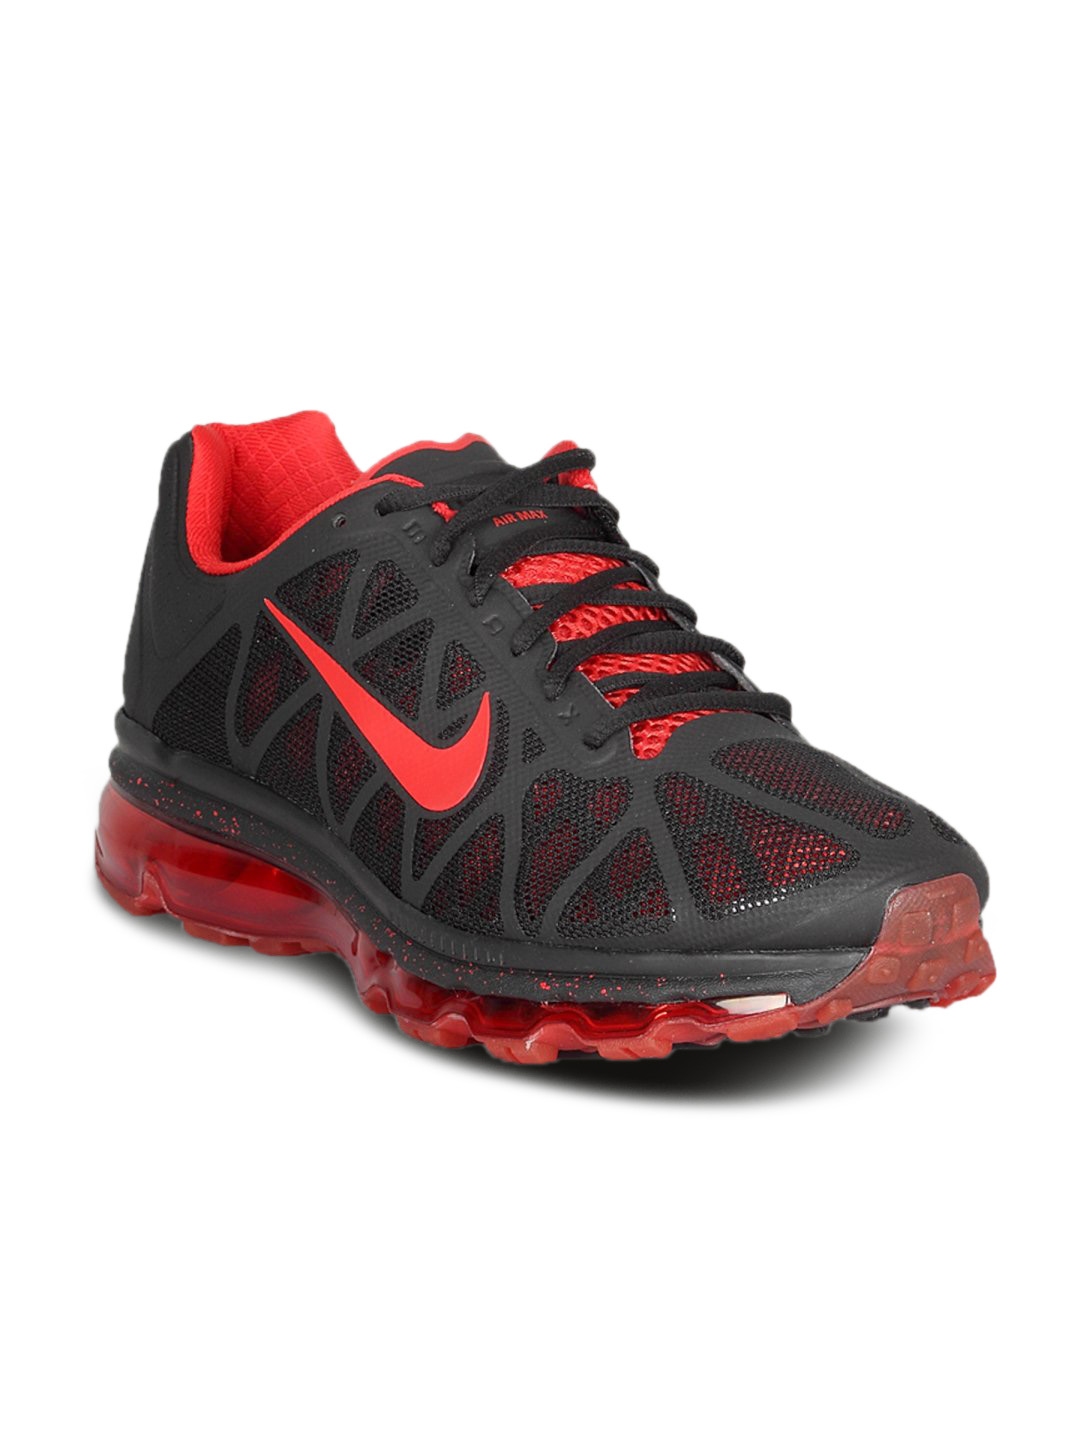 Buy Air Max Black Red Shoe - Sports Shoes for Men | Myntra